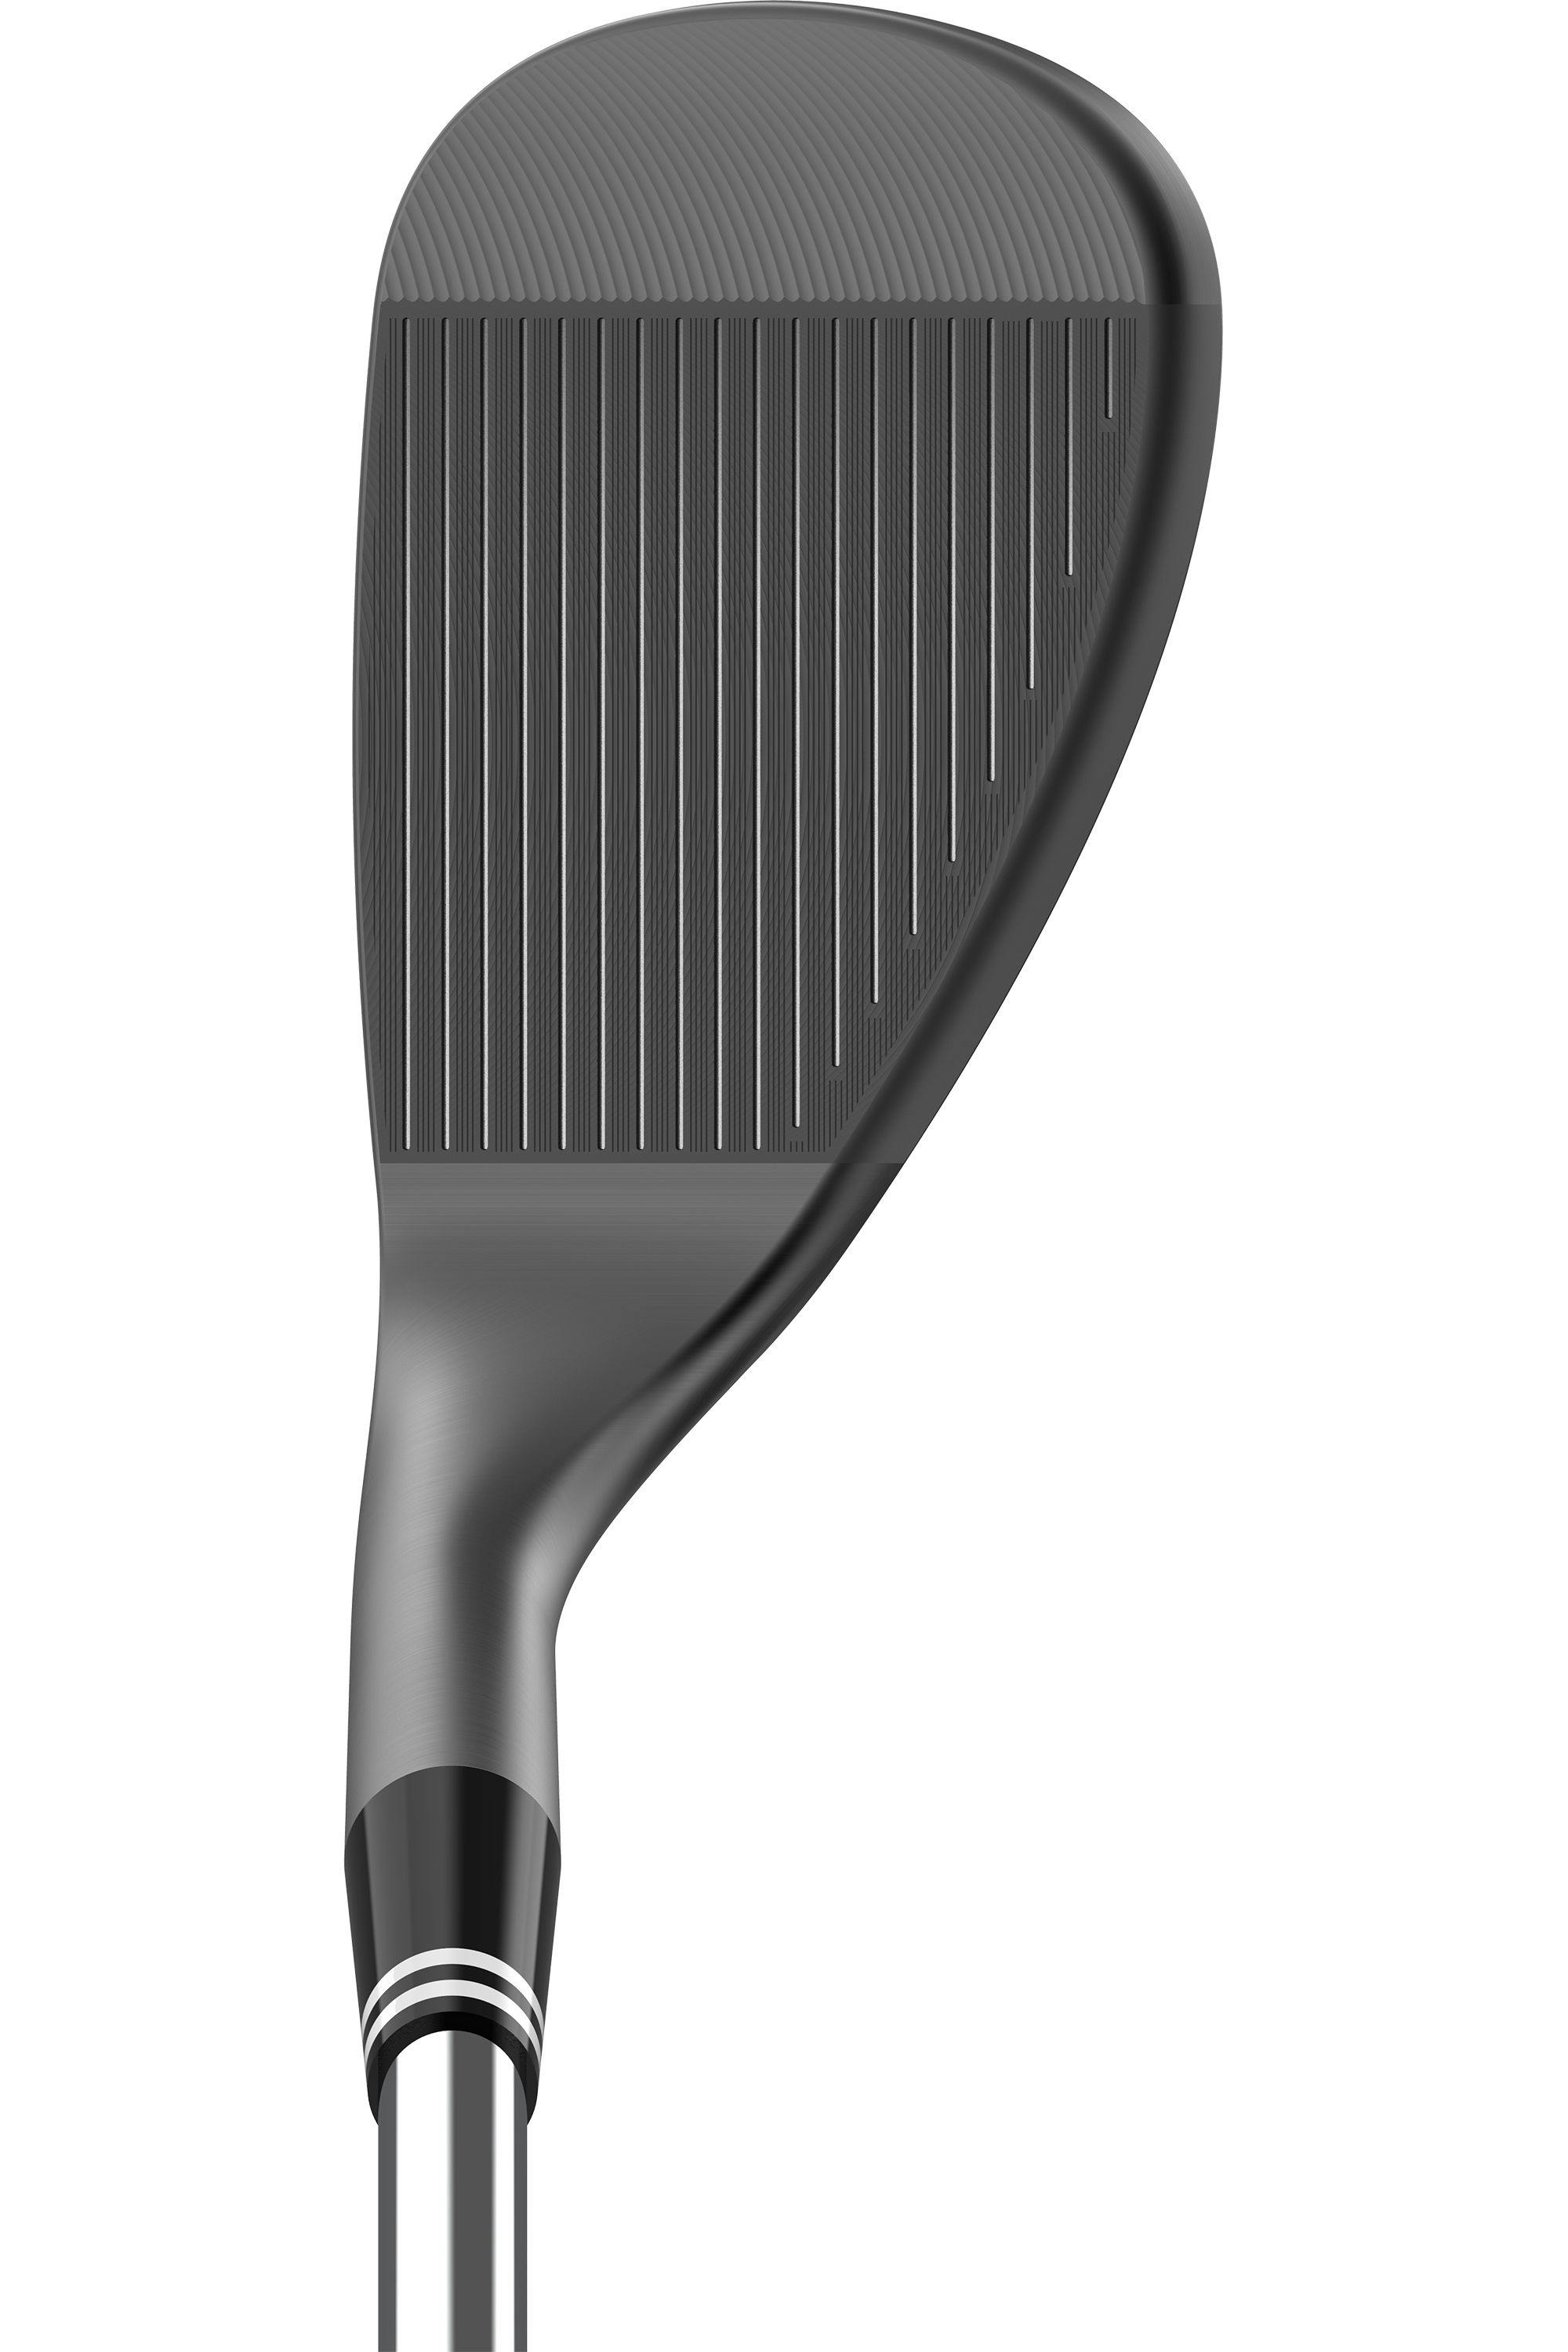 Cleveland RTX Zipcore Black Satin Wedge · Right handed · Steel · 60° · 6°